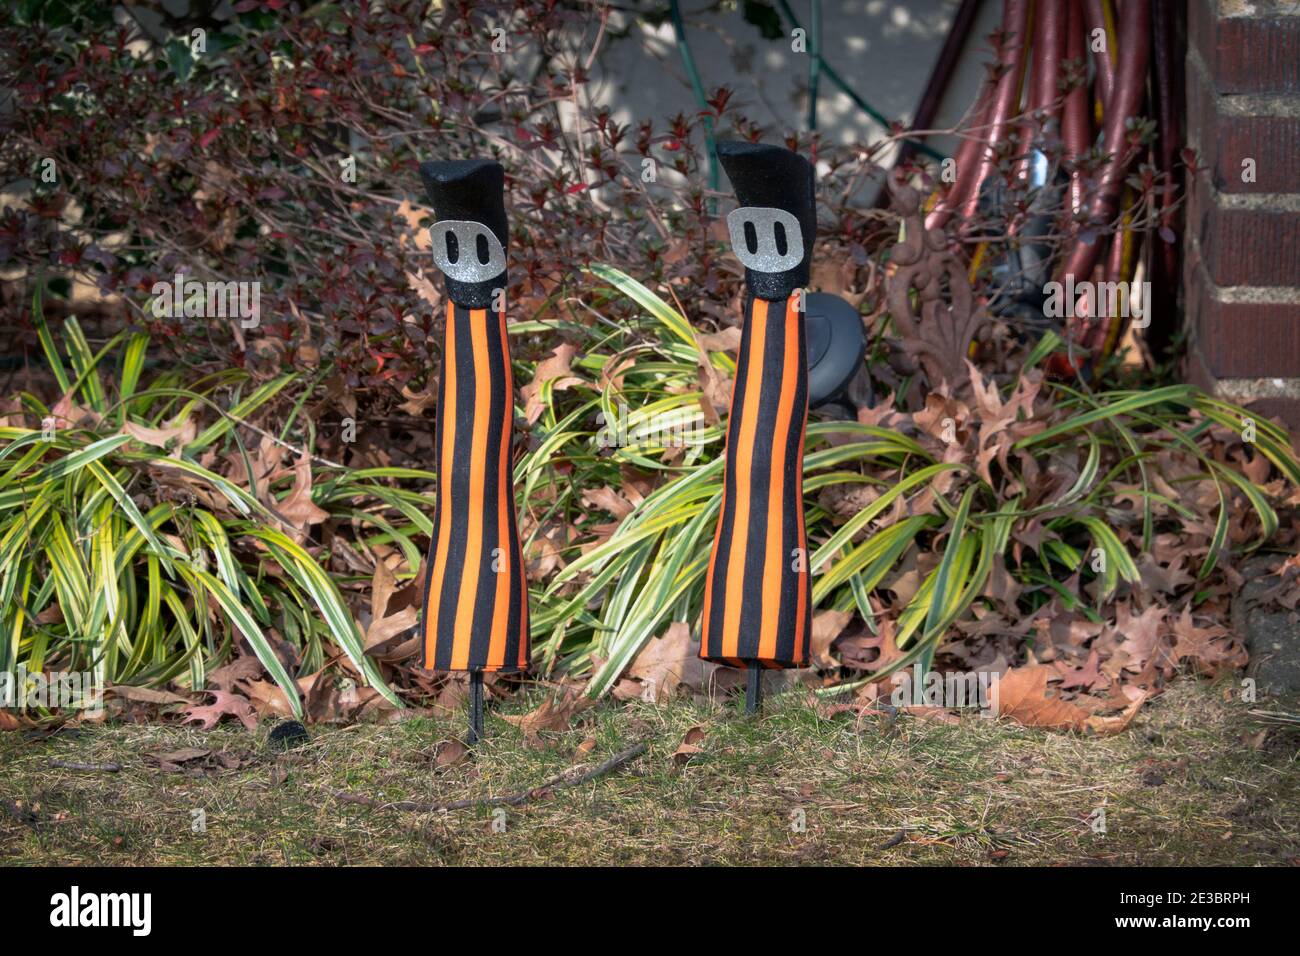 A funny lawn ornament that makes it appear that someone is buried with their feet sticking out of the ground. In Queens, New York. Stock Photo